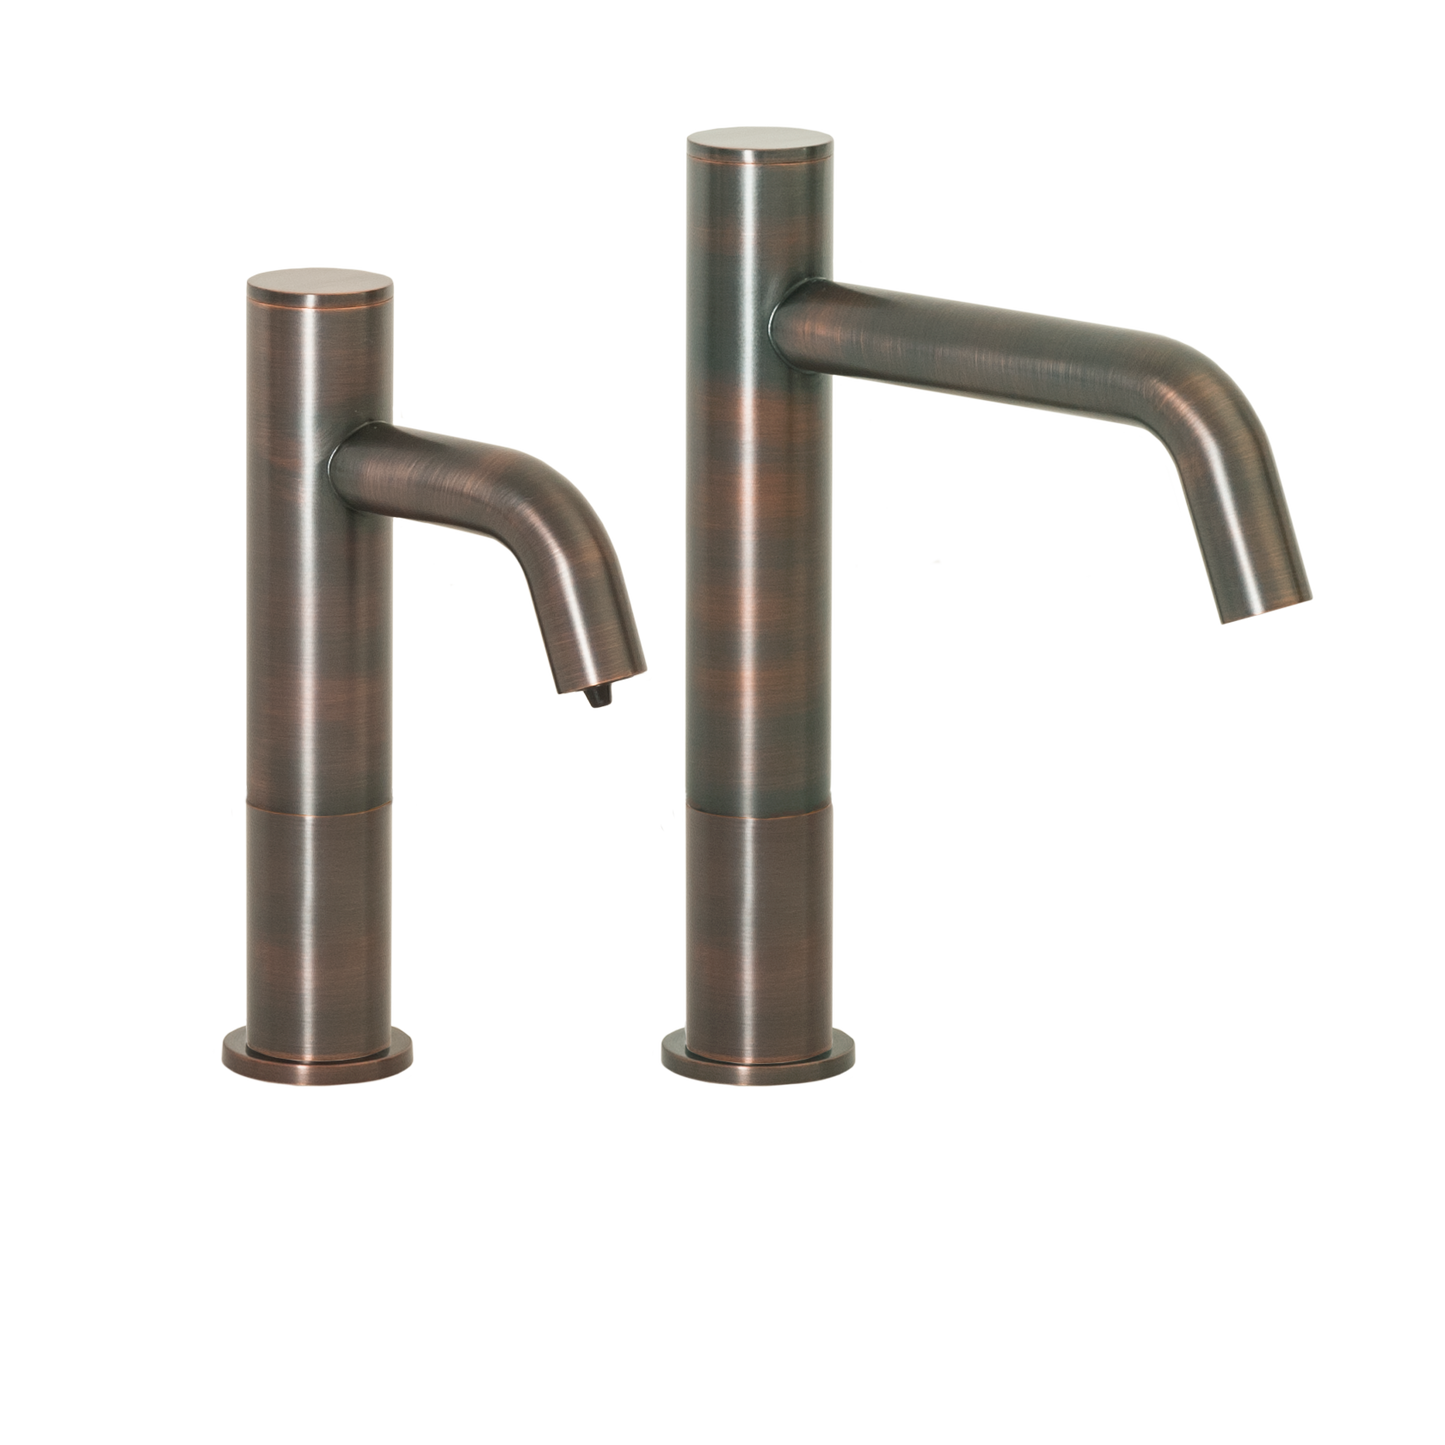 MP3283 Automatic Hands-Free Faucet with 8” Spout Reach, 3” Riser and Automatic Soap Dispenser with 32oz. Bottle In Venetian Bronze